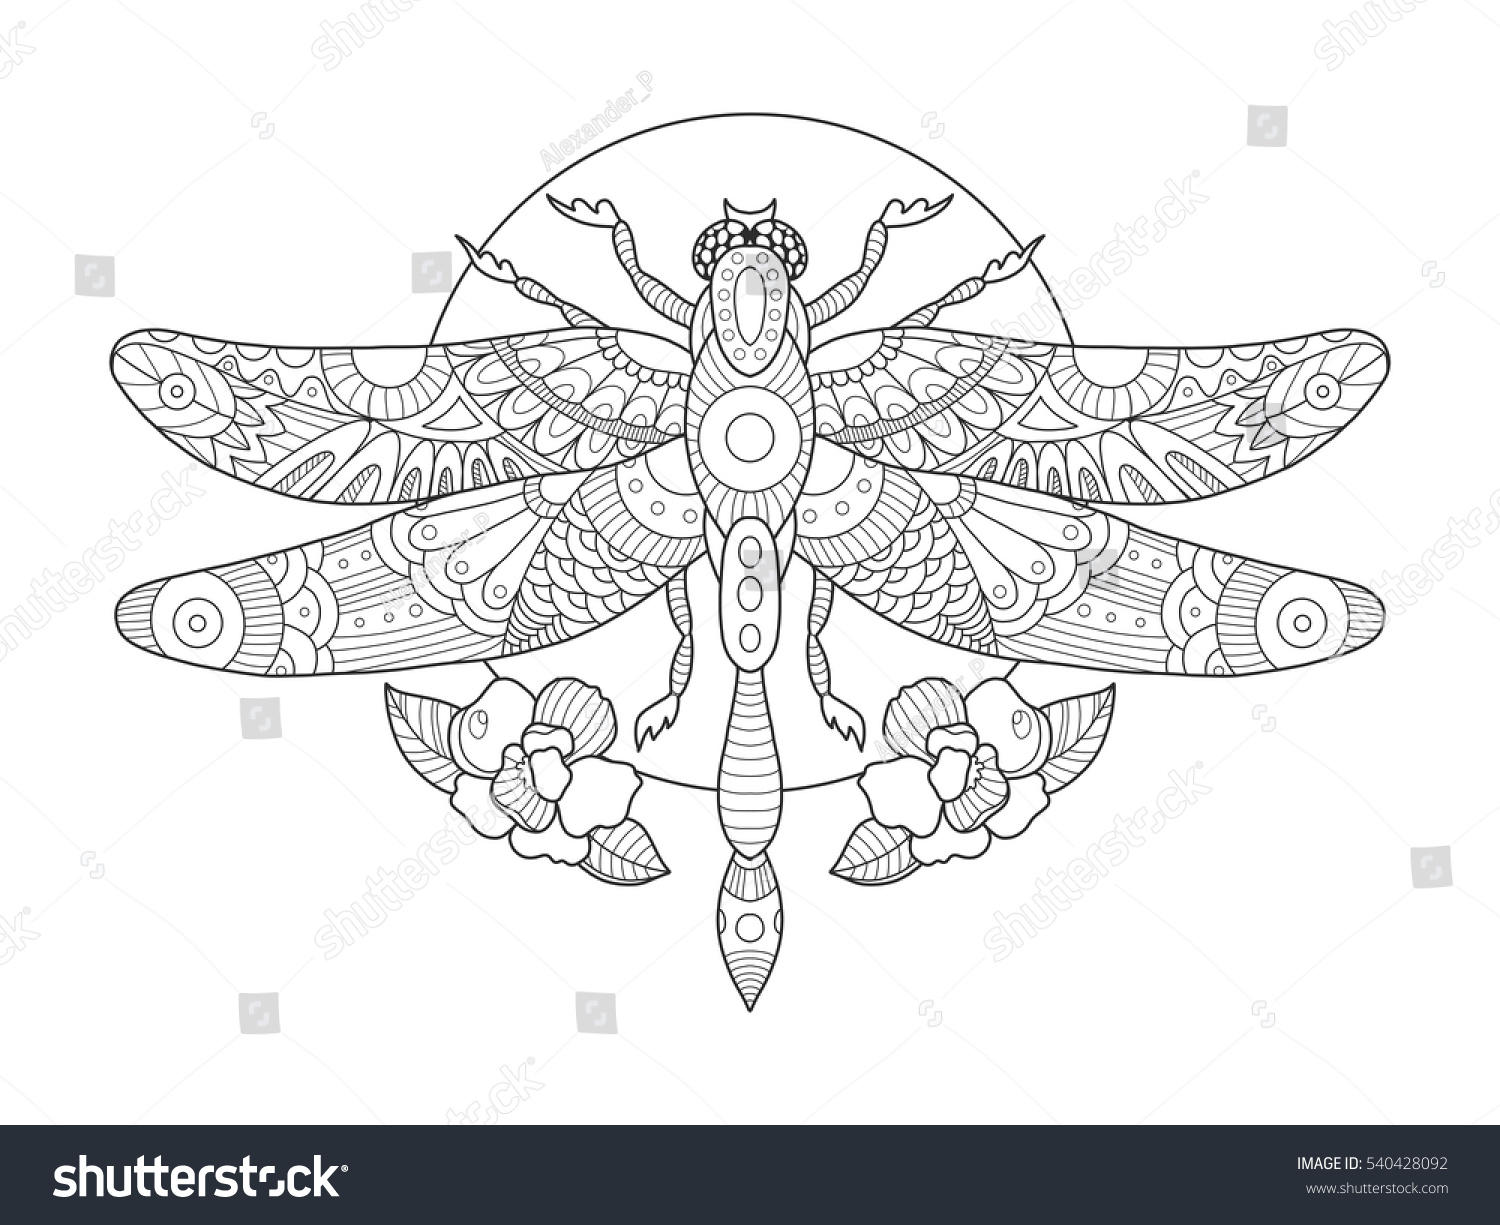 Dragonfly Coloring Book Adults Vector Illustration Stock ...